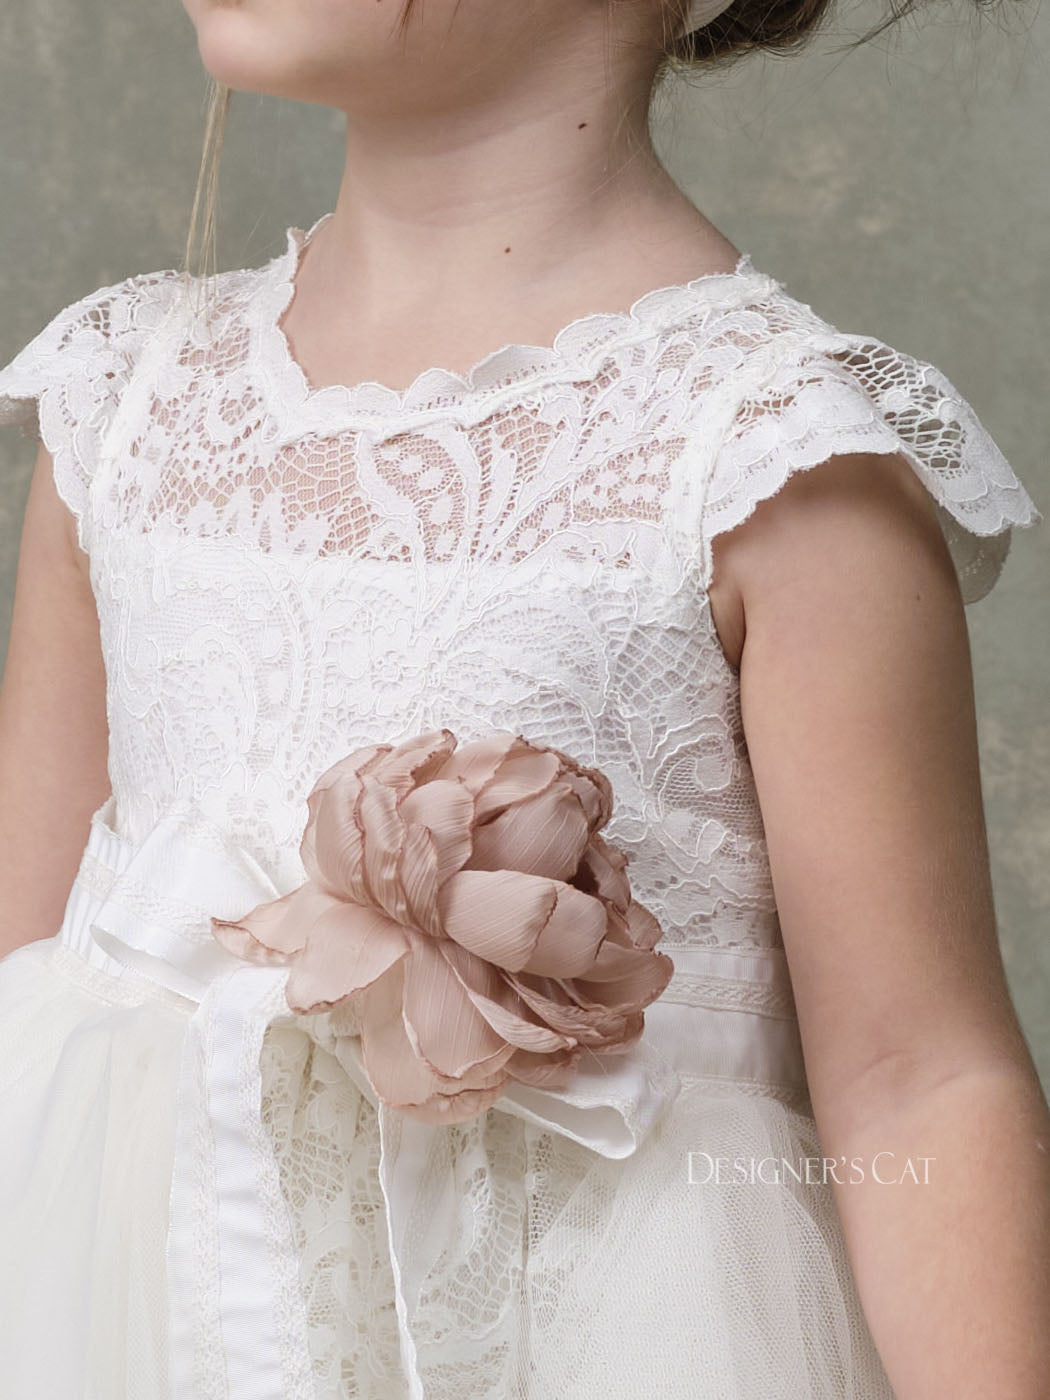 Baptism dress with Lace - VAGIA Ivory